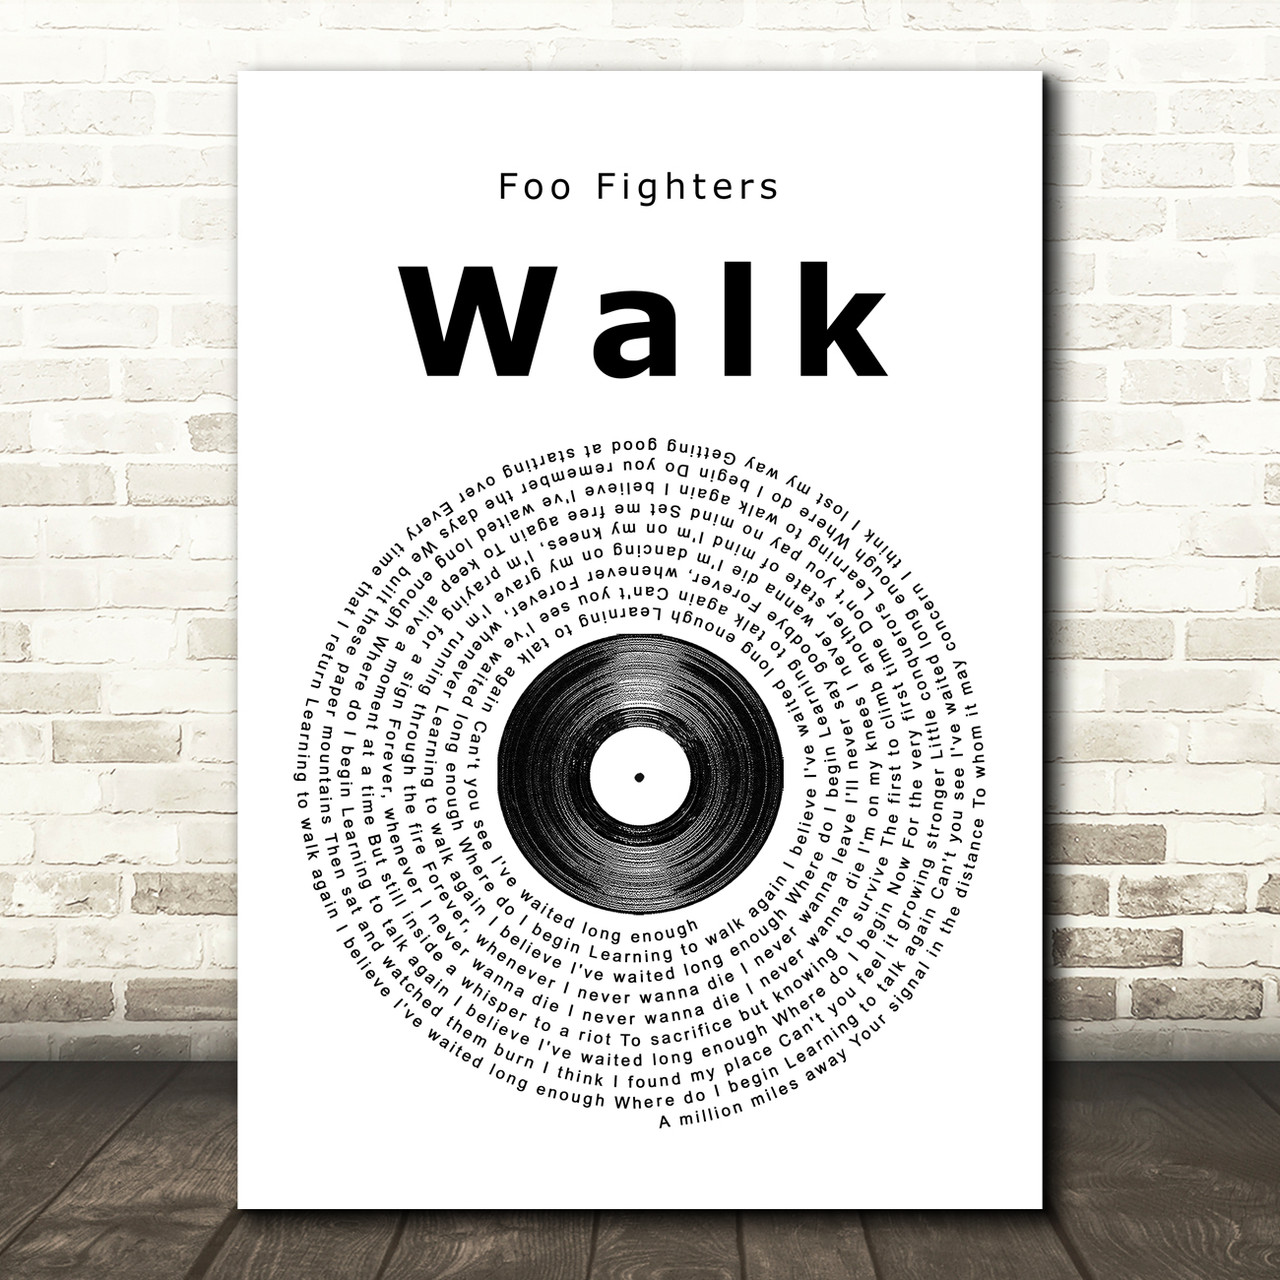 Do you remember the days? - Walk | Foo Fighters Song | Home Print